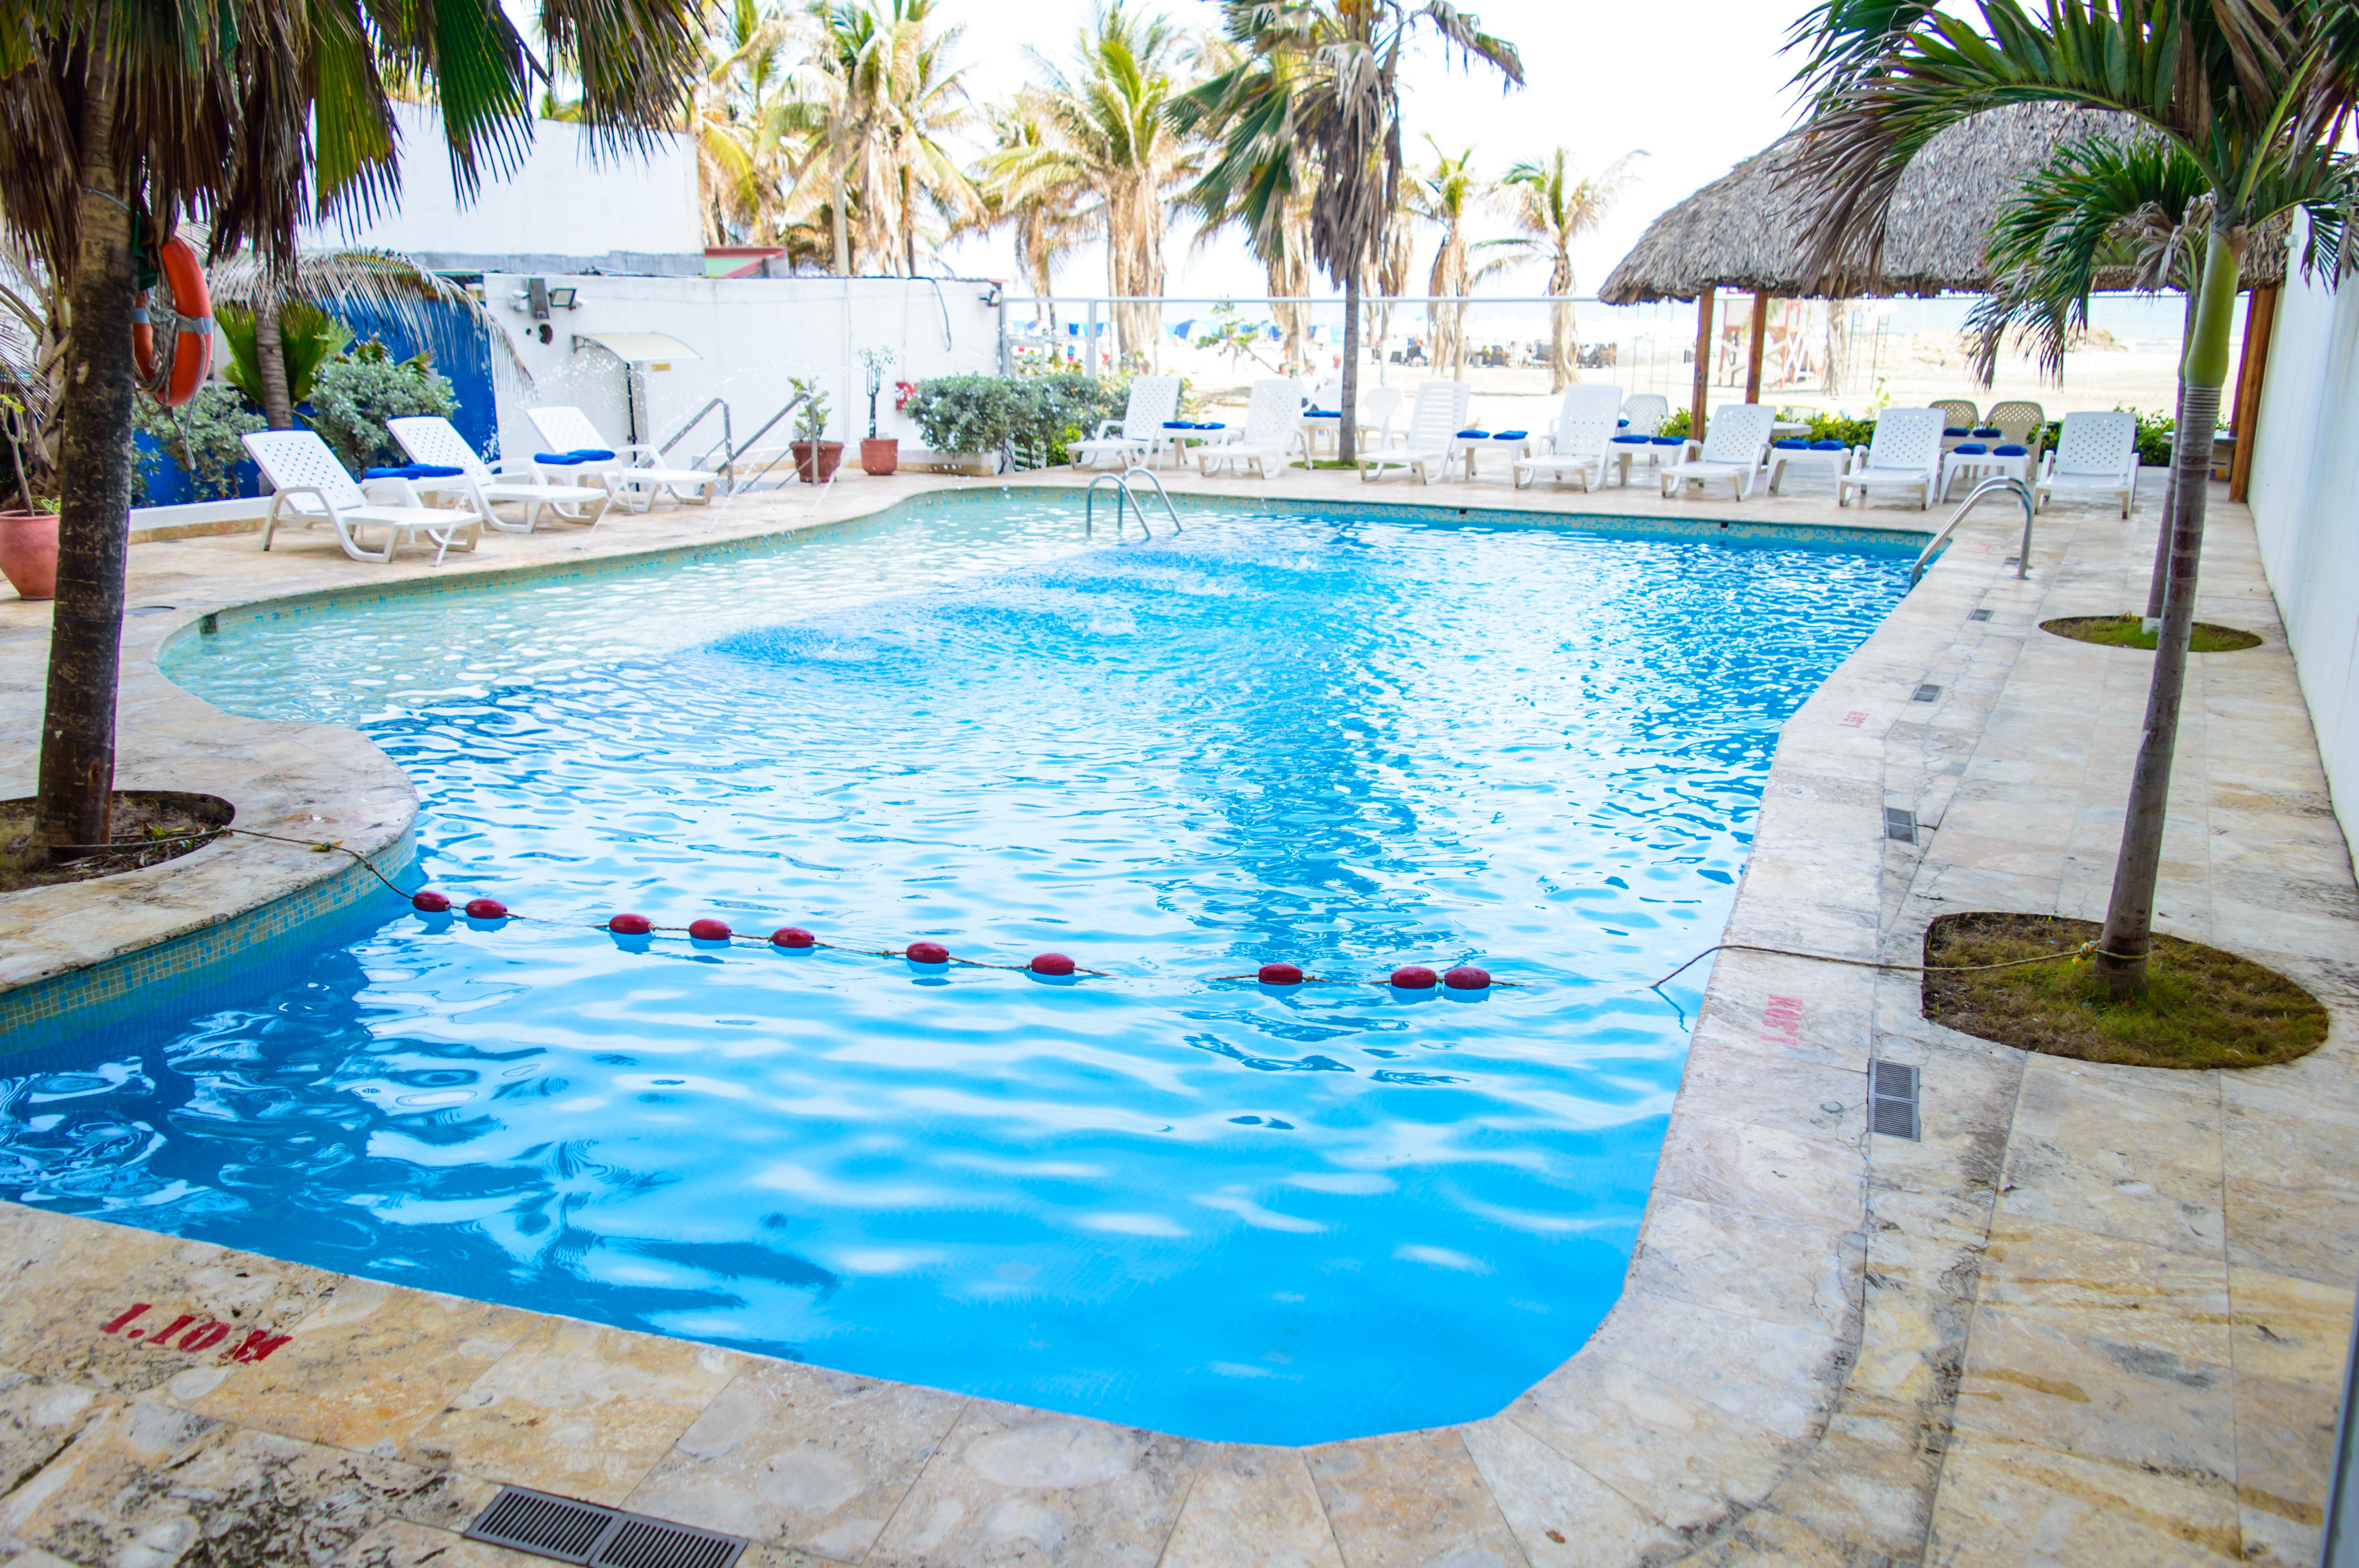 HOTEL PLAYA CLUB CARTAGENA 3* (Colombia) - from C$ 82 | iBOOKED